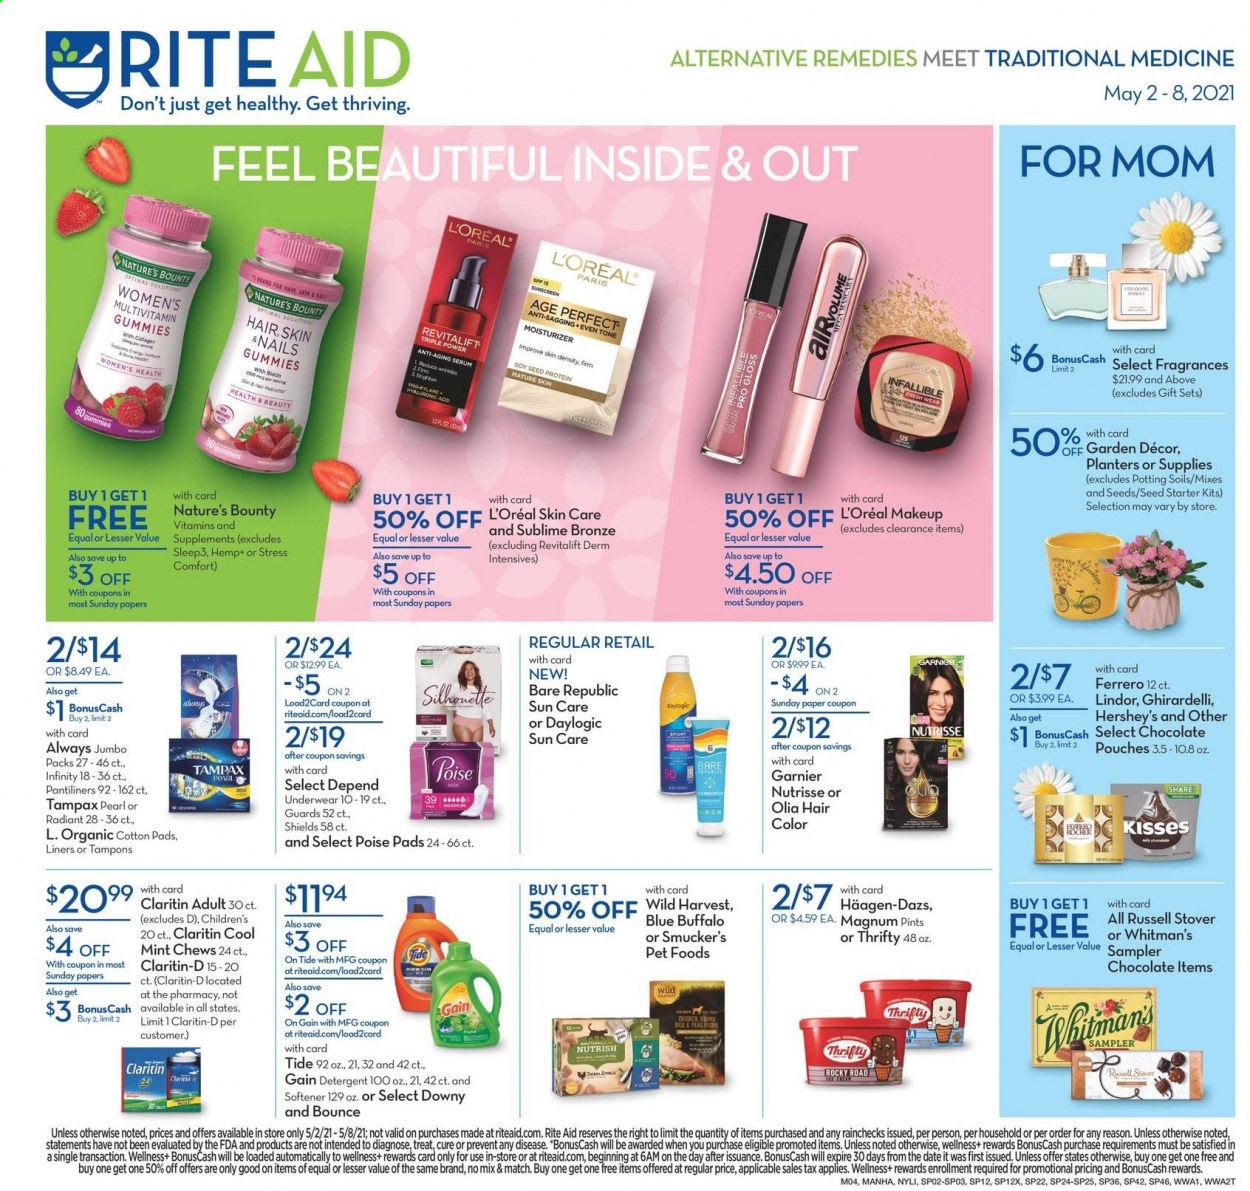 thumbnail - RITE AID Flyer - 05/02/2021 - 05/08/2021 - Sales products - Wild Harvest, Magnum, Hershey's, Häagen-Dazs, Lindor, Ferrero Rocher, chewing gum, Ghirardelli, Planters, detergent, Gain, Tide, fabric softener, Bounce, Tampax, pantiliners, tampons, Garnier, L’Oréal, moisturizer, serum, Infinity, Daylogic, hair color, makeup, Blue Buffalo, Nutrish, plant seeds, Biotin, multivitamin, Nature's Bounty. Page 1.